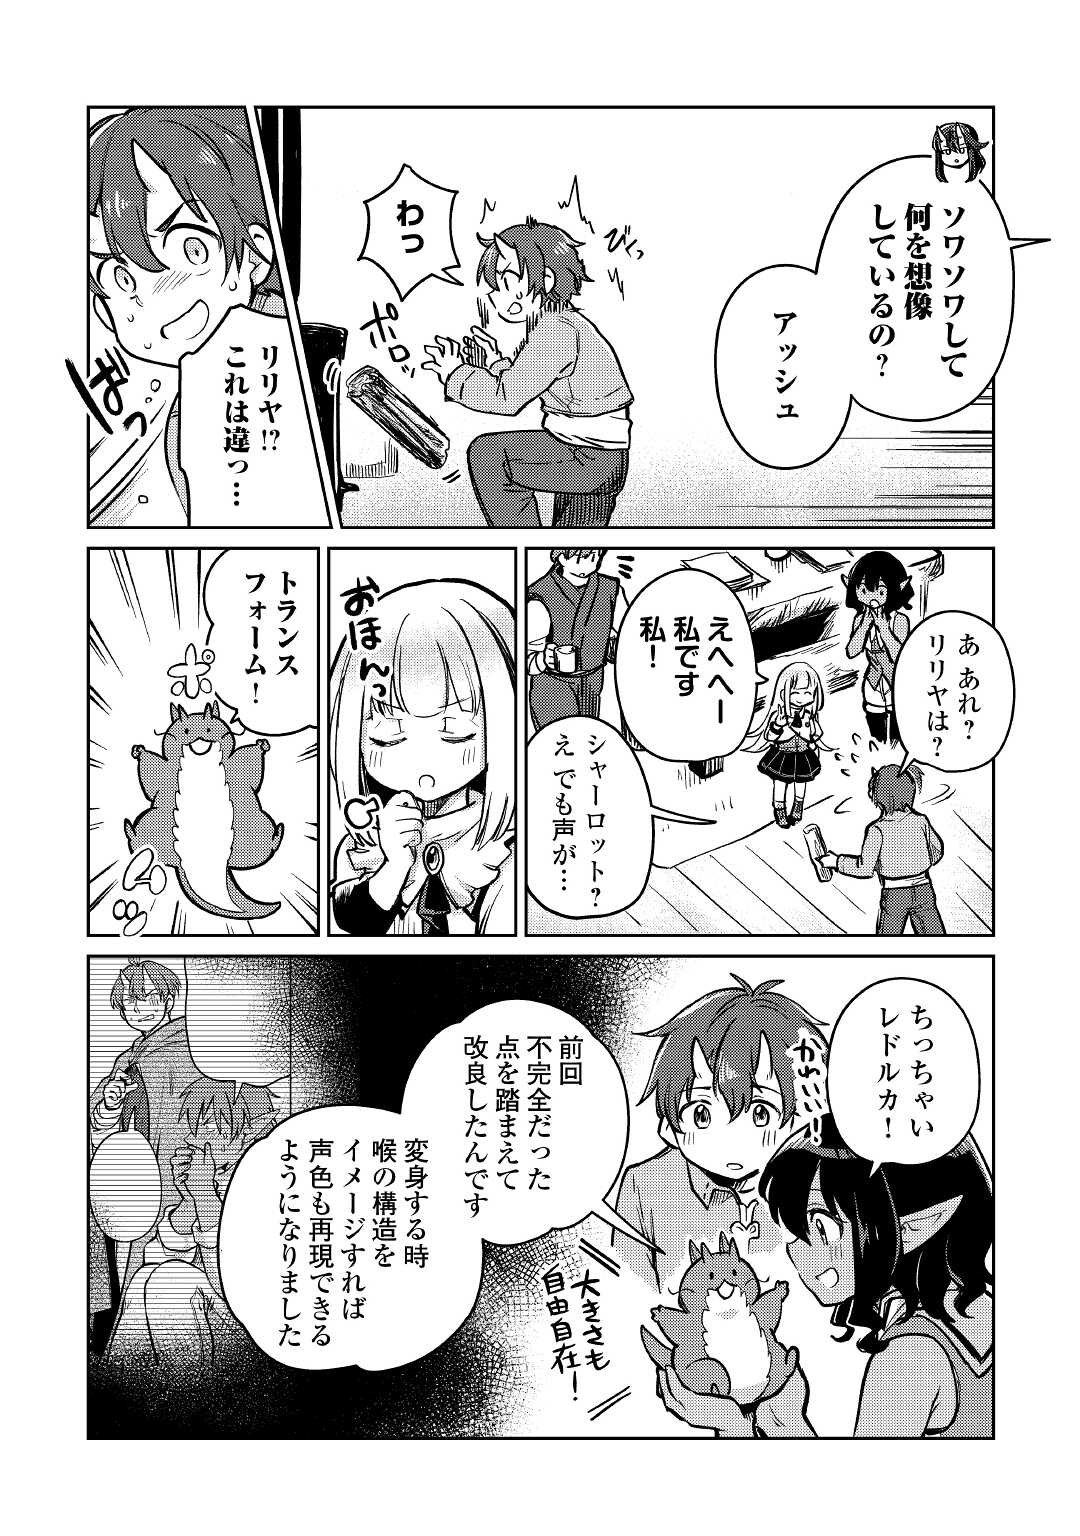 The Former Structural Researcher’s Story of Otherworldly Adventure 第35話 - Page 22